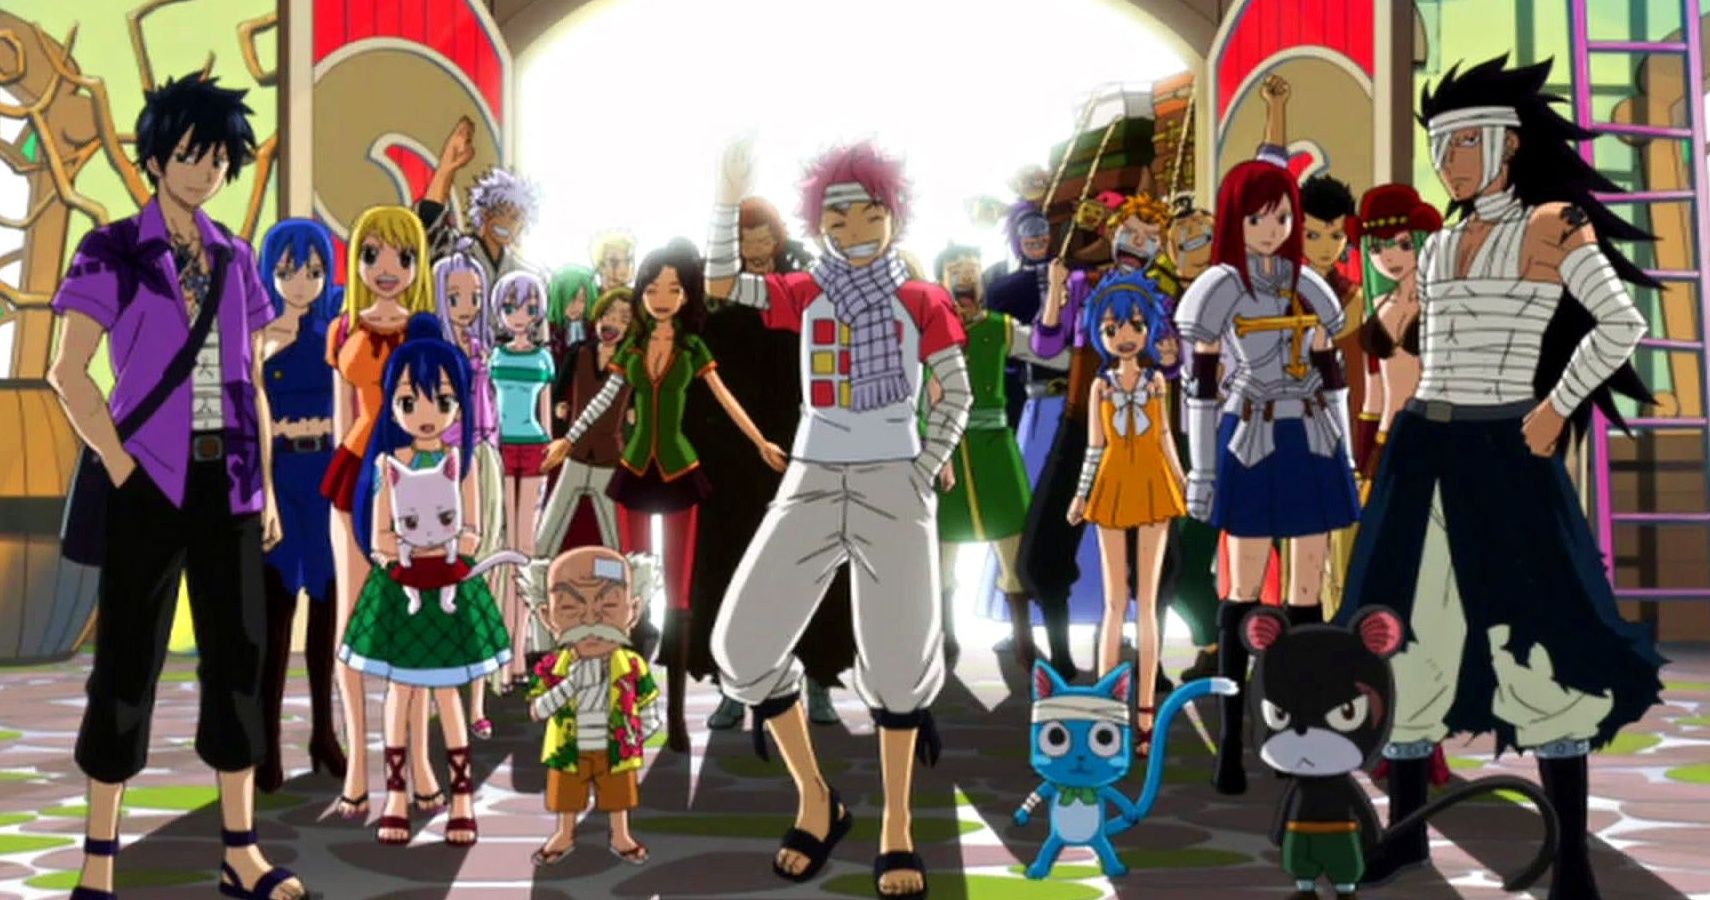 Epic Contest groupes d'animes : Poule 6 Featured-Image-Fairy-Tail-Cropped